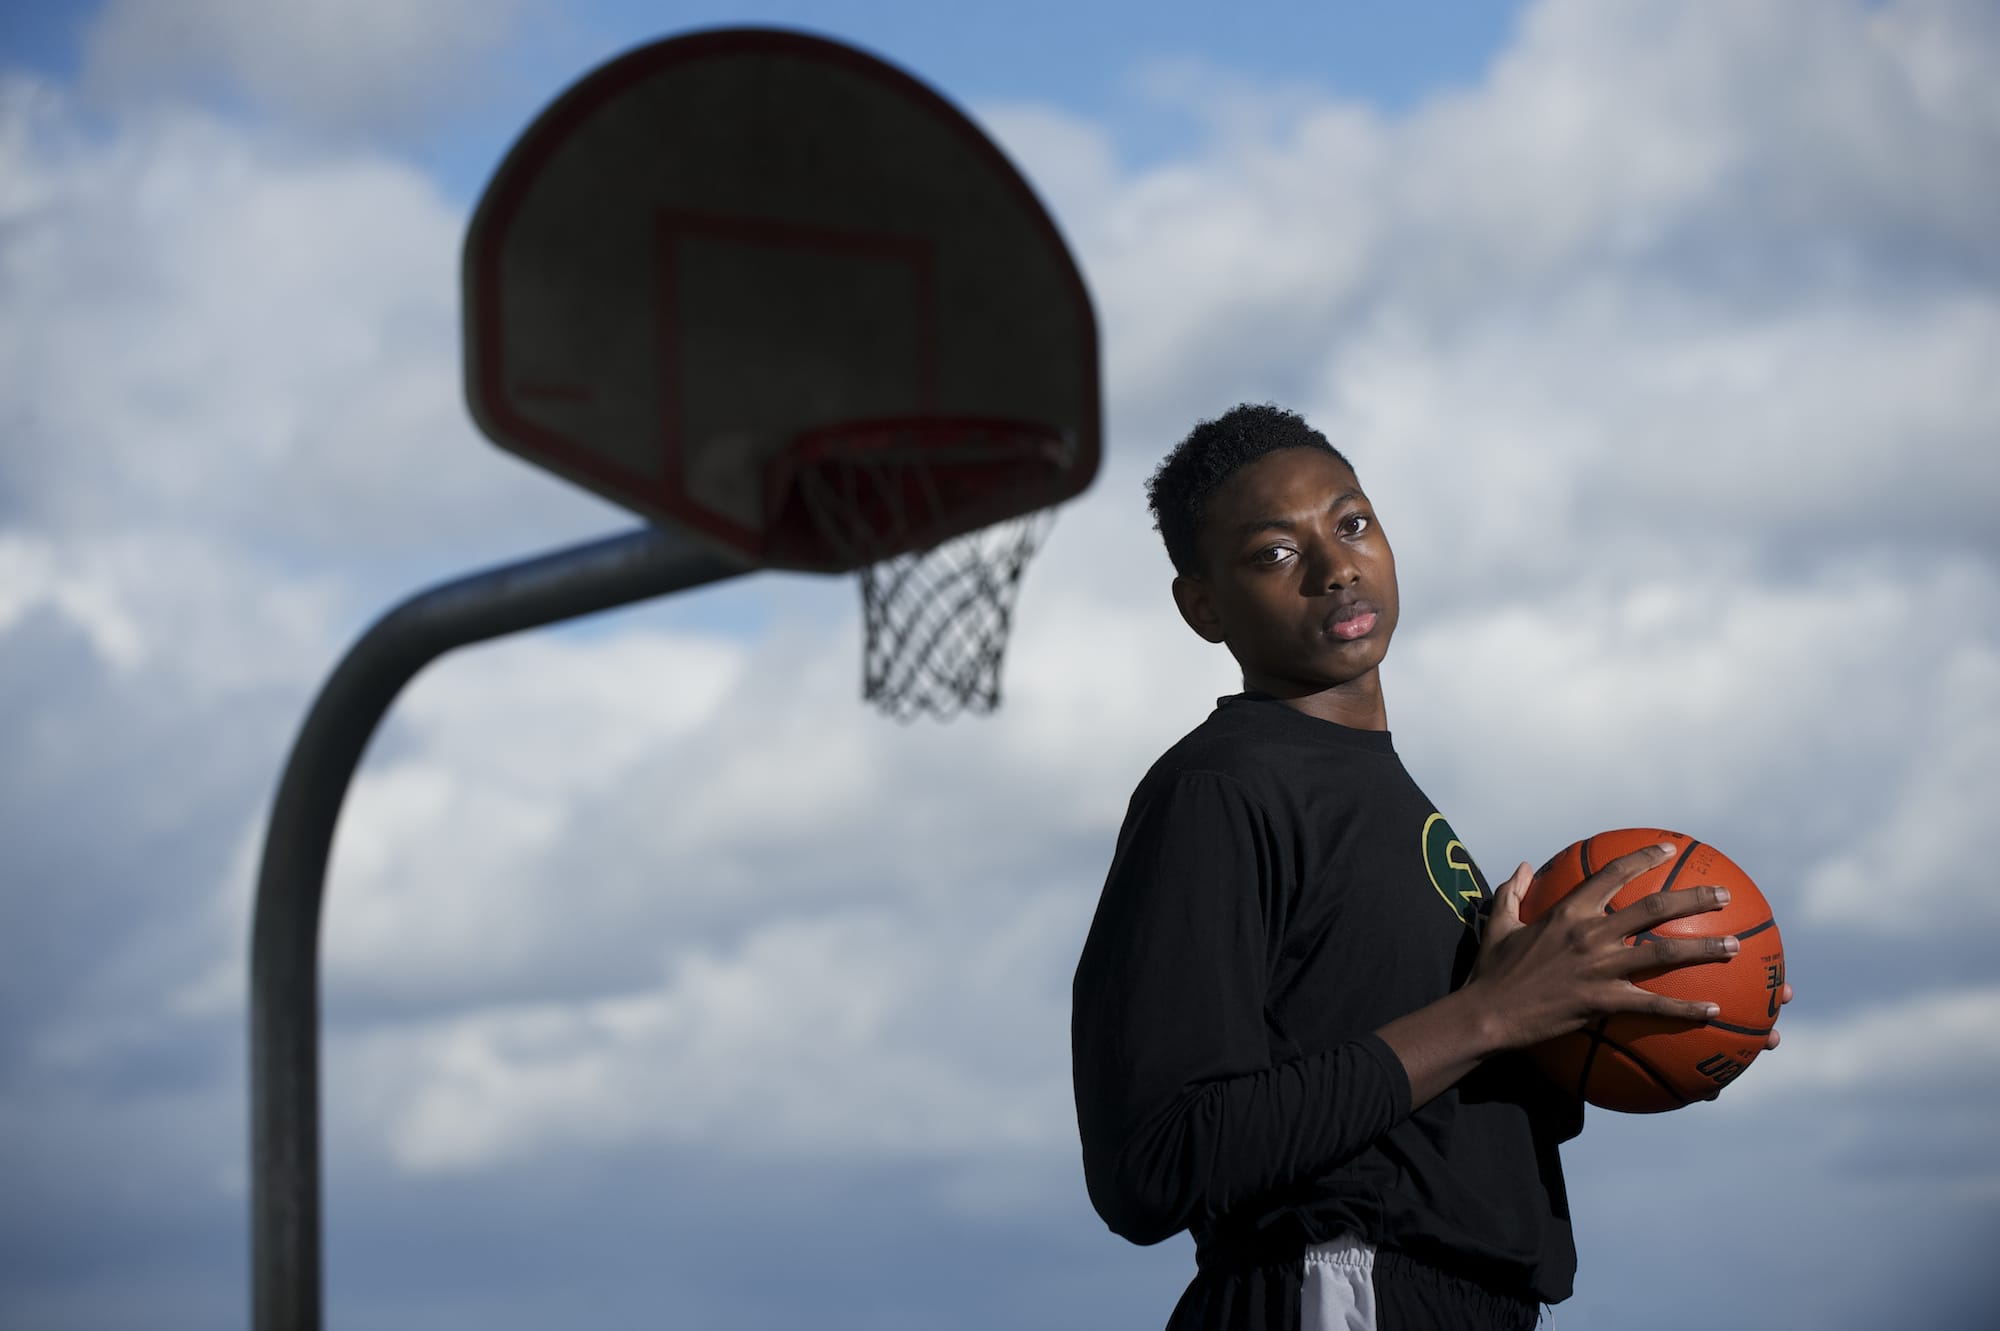 Evergreen High School's Robert Franks, shown, Thursday, March 20, 2014, is The Columbian's All-Region boys basketball player of the year.